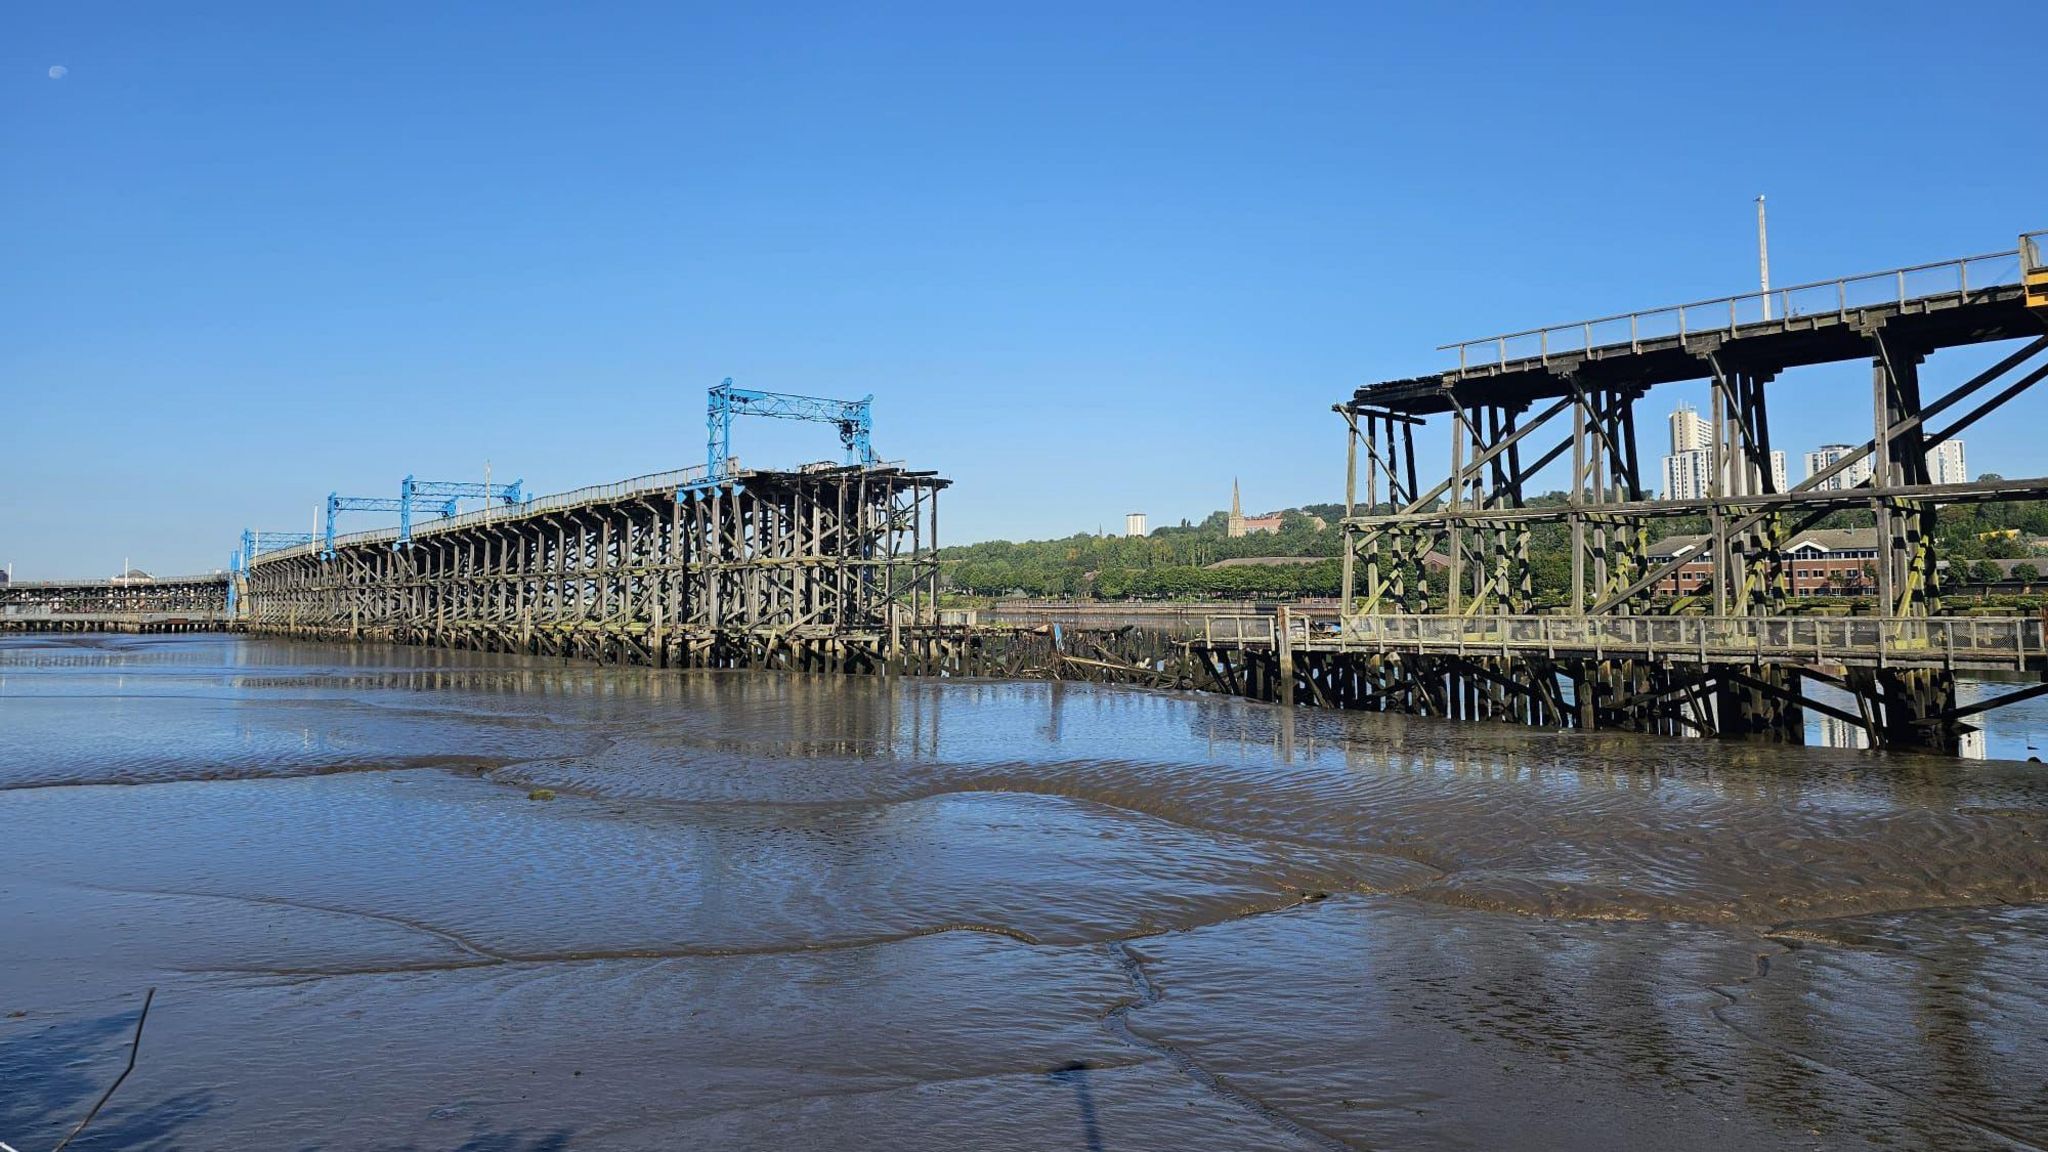 View of Dunston Staiths